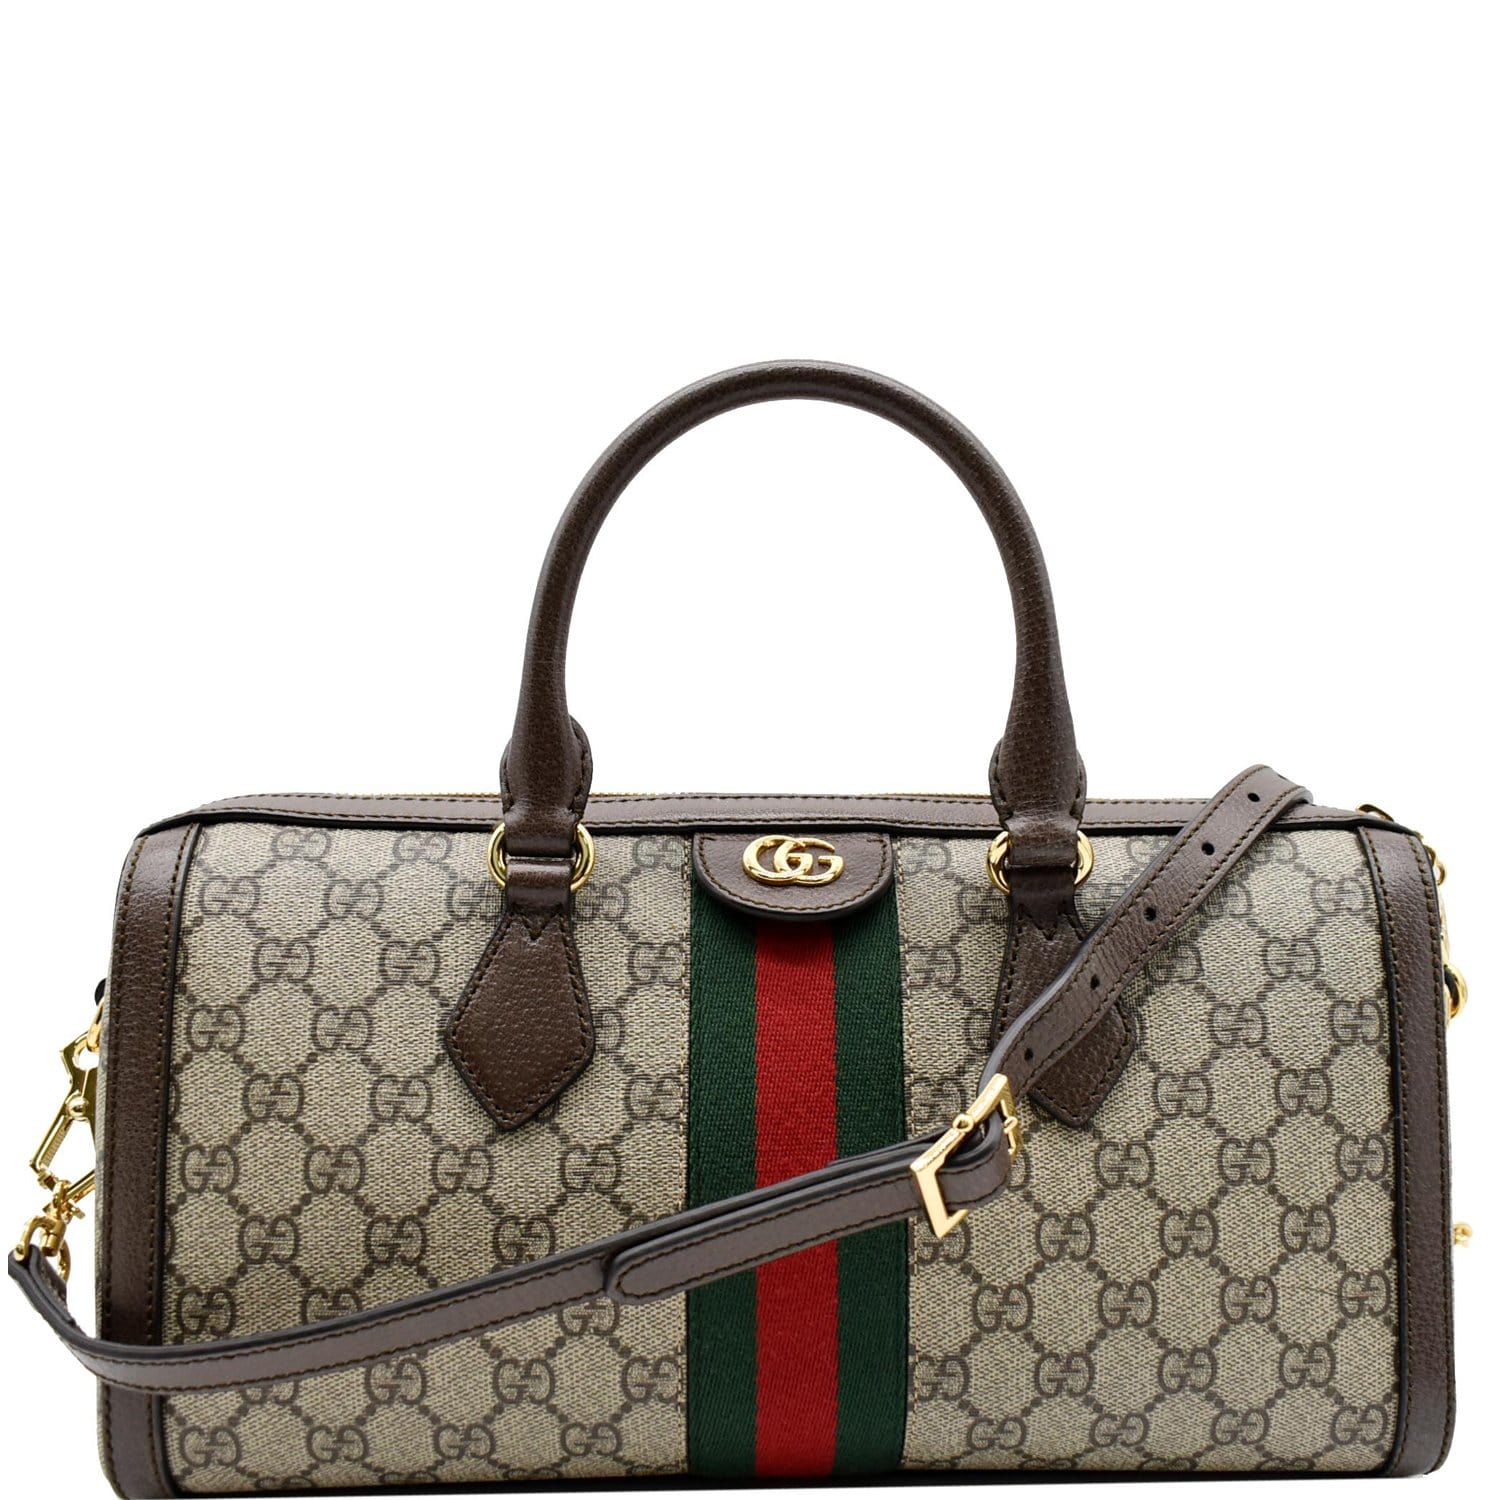 Gucci Ophidia bag  Gucci bag outfit, Gucci ophidia bag, Gucci bag